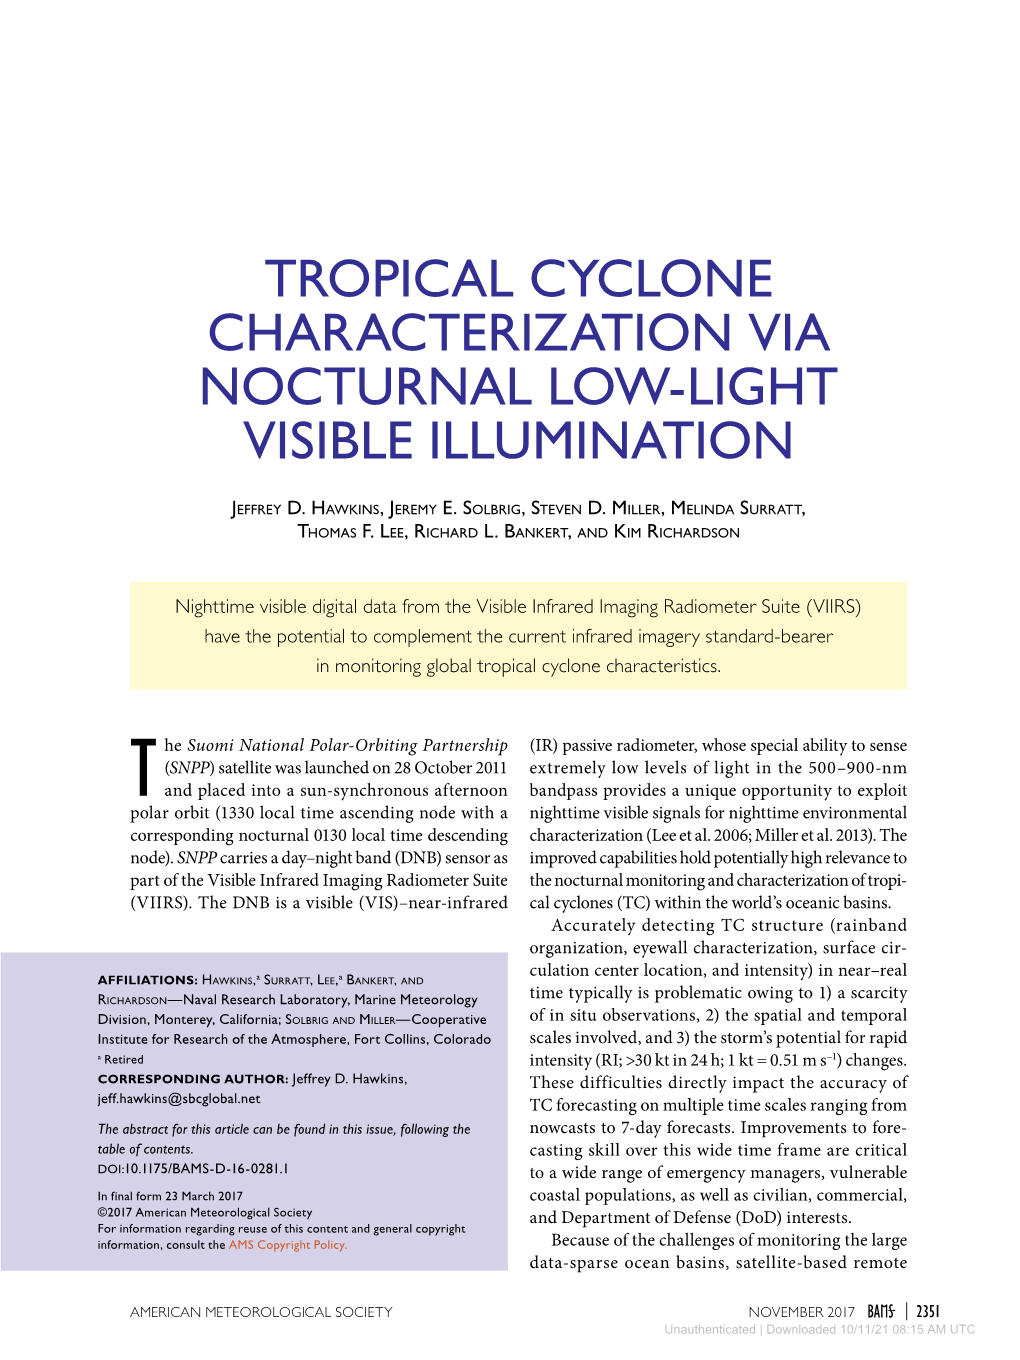 Tropical Cyclone Characterization Via Nocturnal Low-Light Visible Illumination